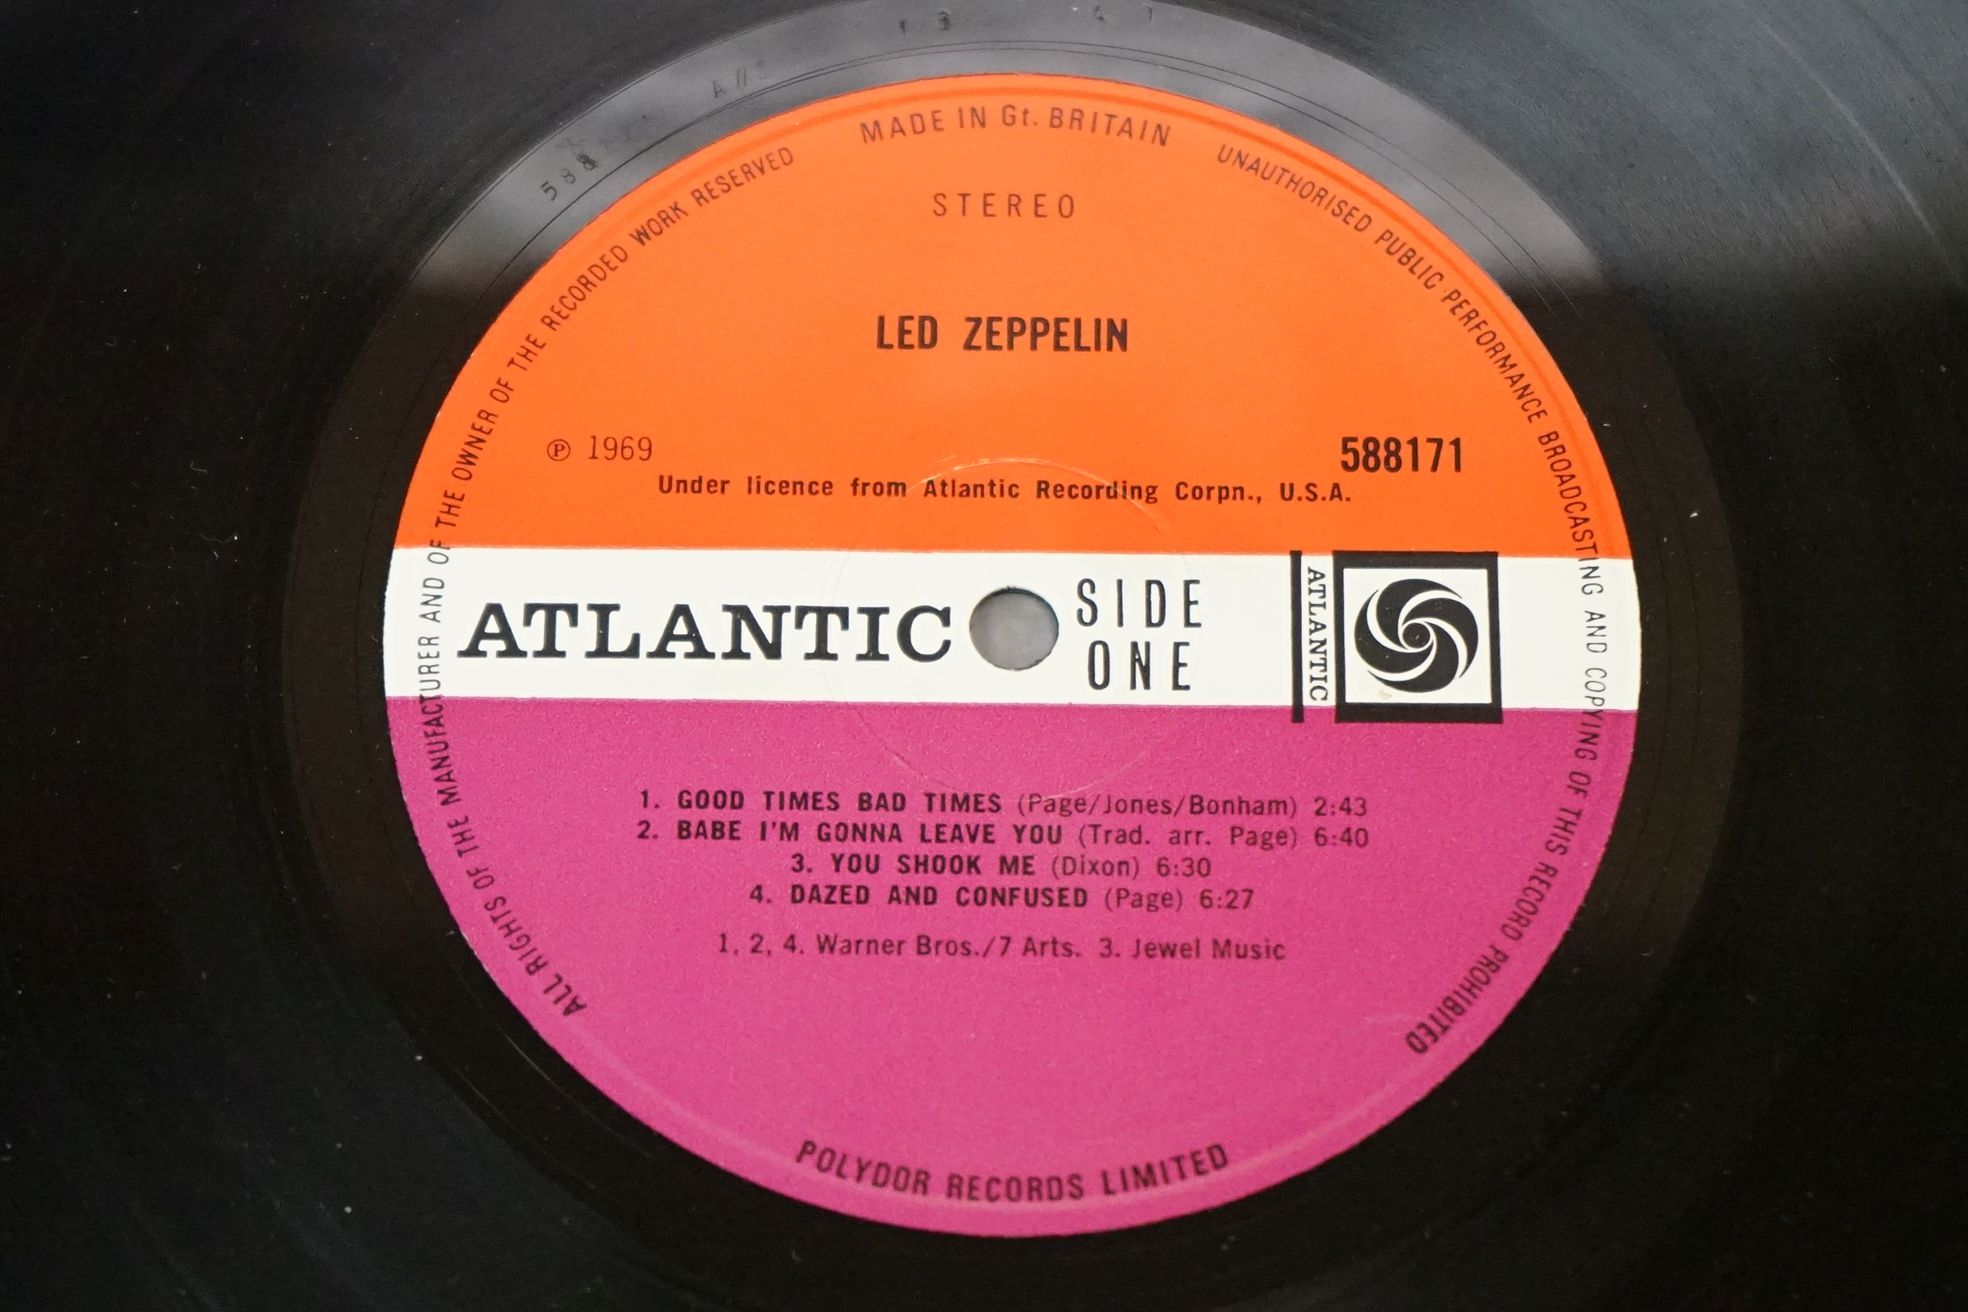 Vinyl - 3 Led Zeppelin LPs to include One (588171) Warner Bros / Arts / Jewel Music publishing - Image 3 of 14